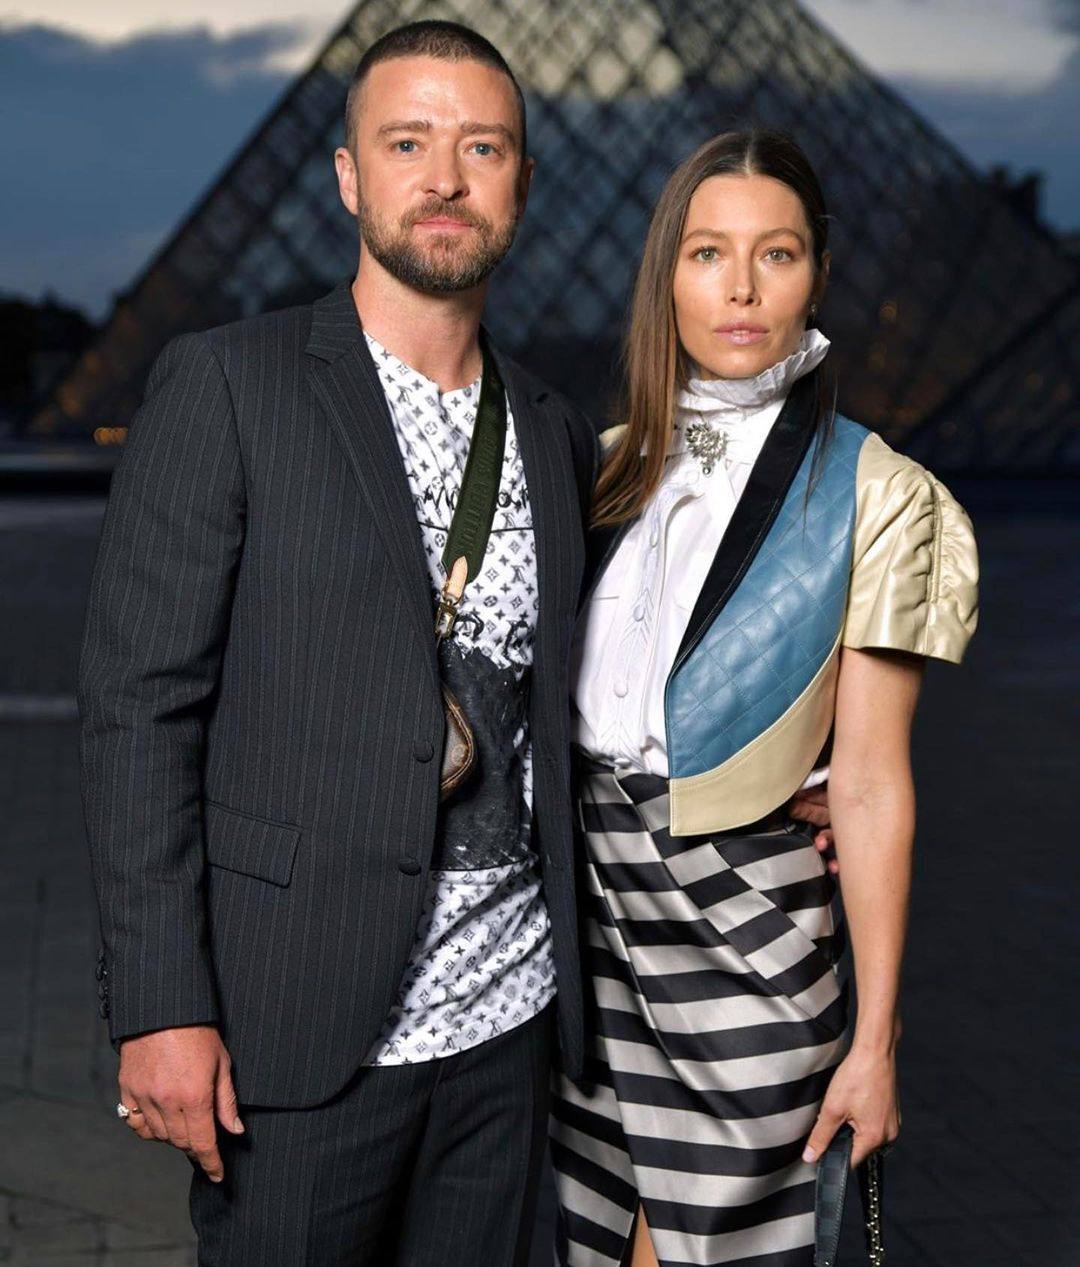 Justin Timberlake and Jessica Biel have been in the media lately due to Britney Spears’ upcoming memoir release. Photo: @justintimberlake/Instagram